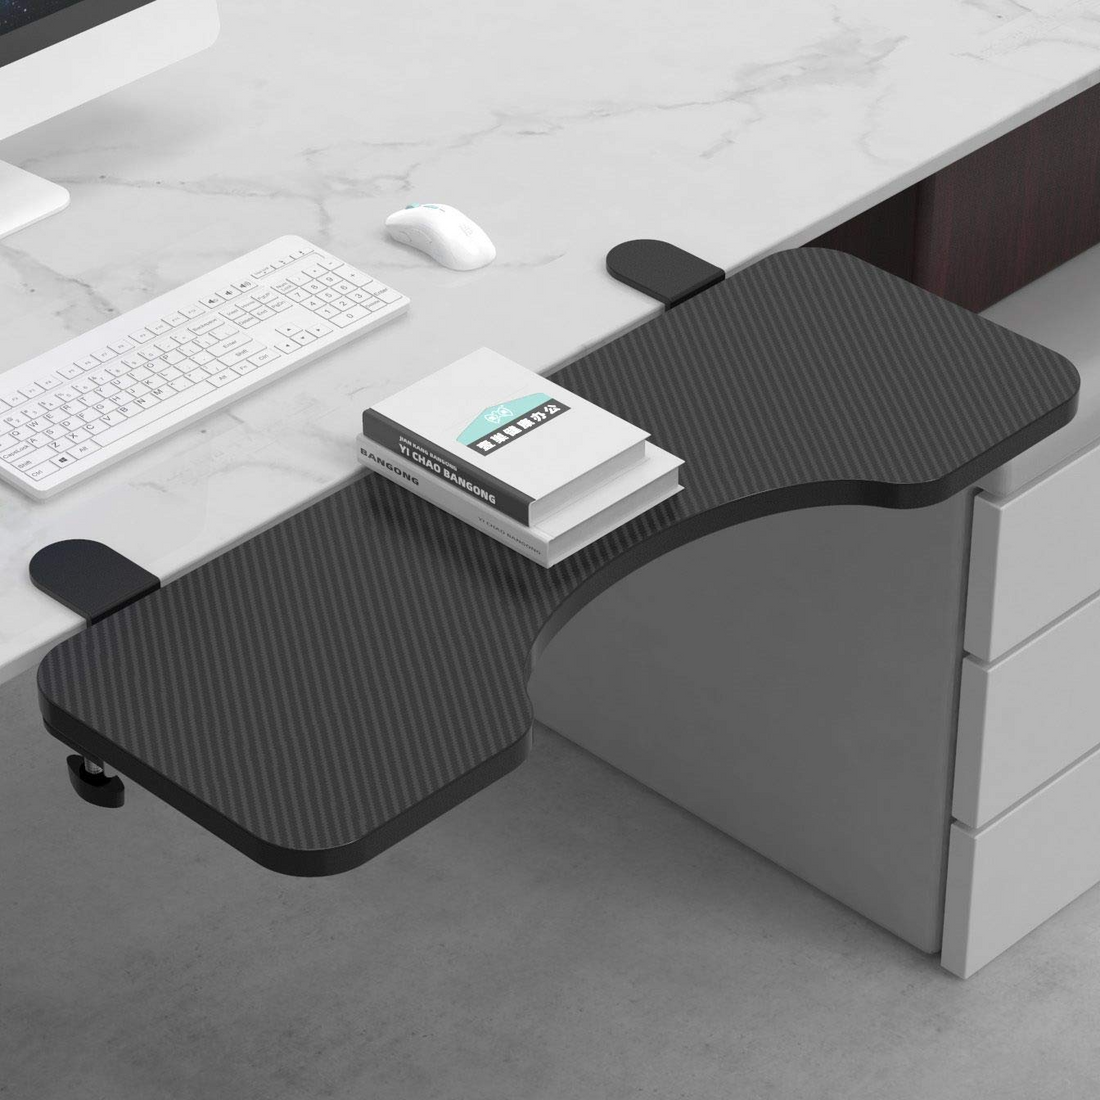 Ergonomics Desk Extender Arc Tray, 25.2"x9.5" Punch-Free Clamp on, Foldable Keyboard Drawer Tray, Table Mount Armrest Shelf, Computer Elbow Arm Support